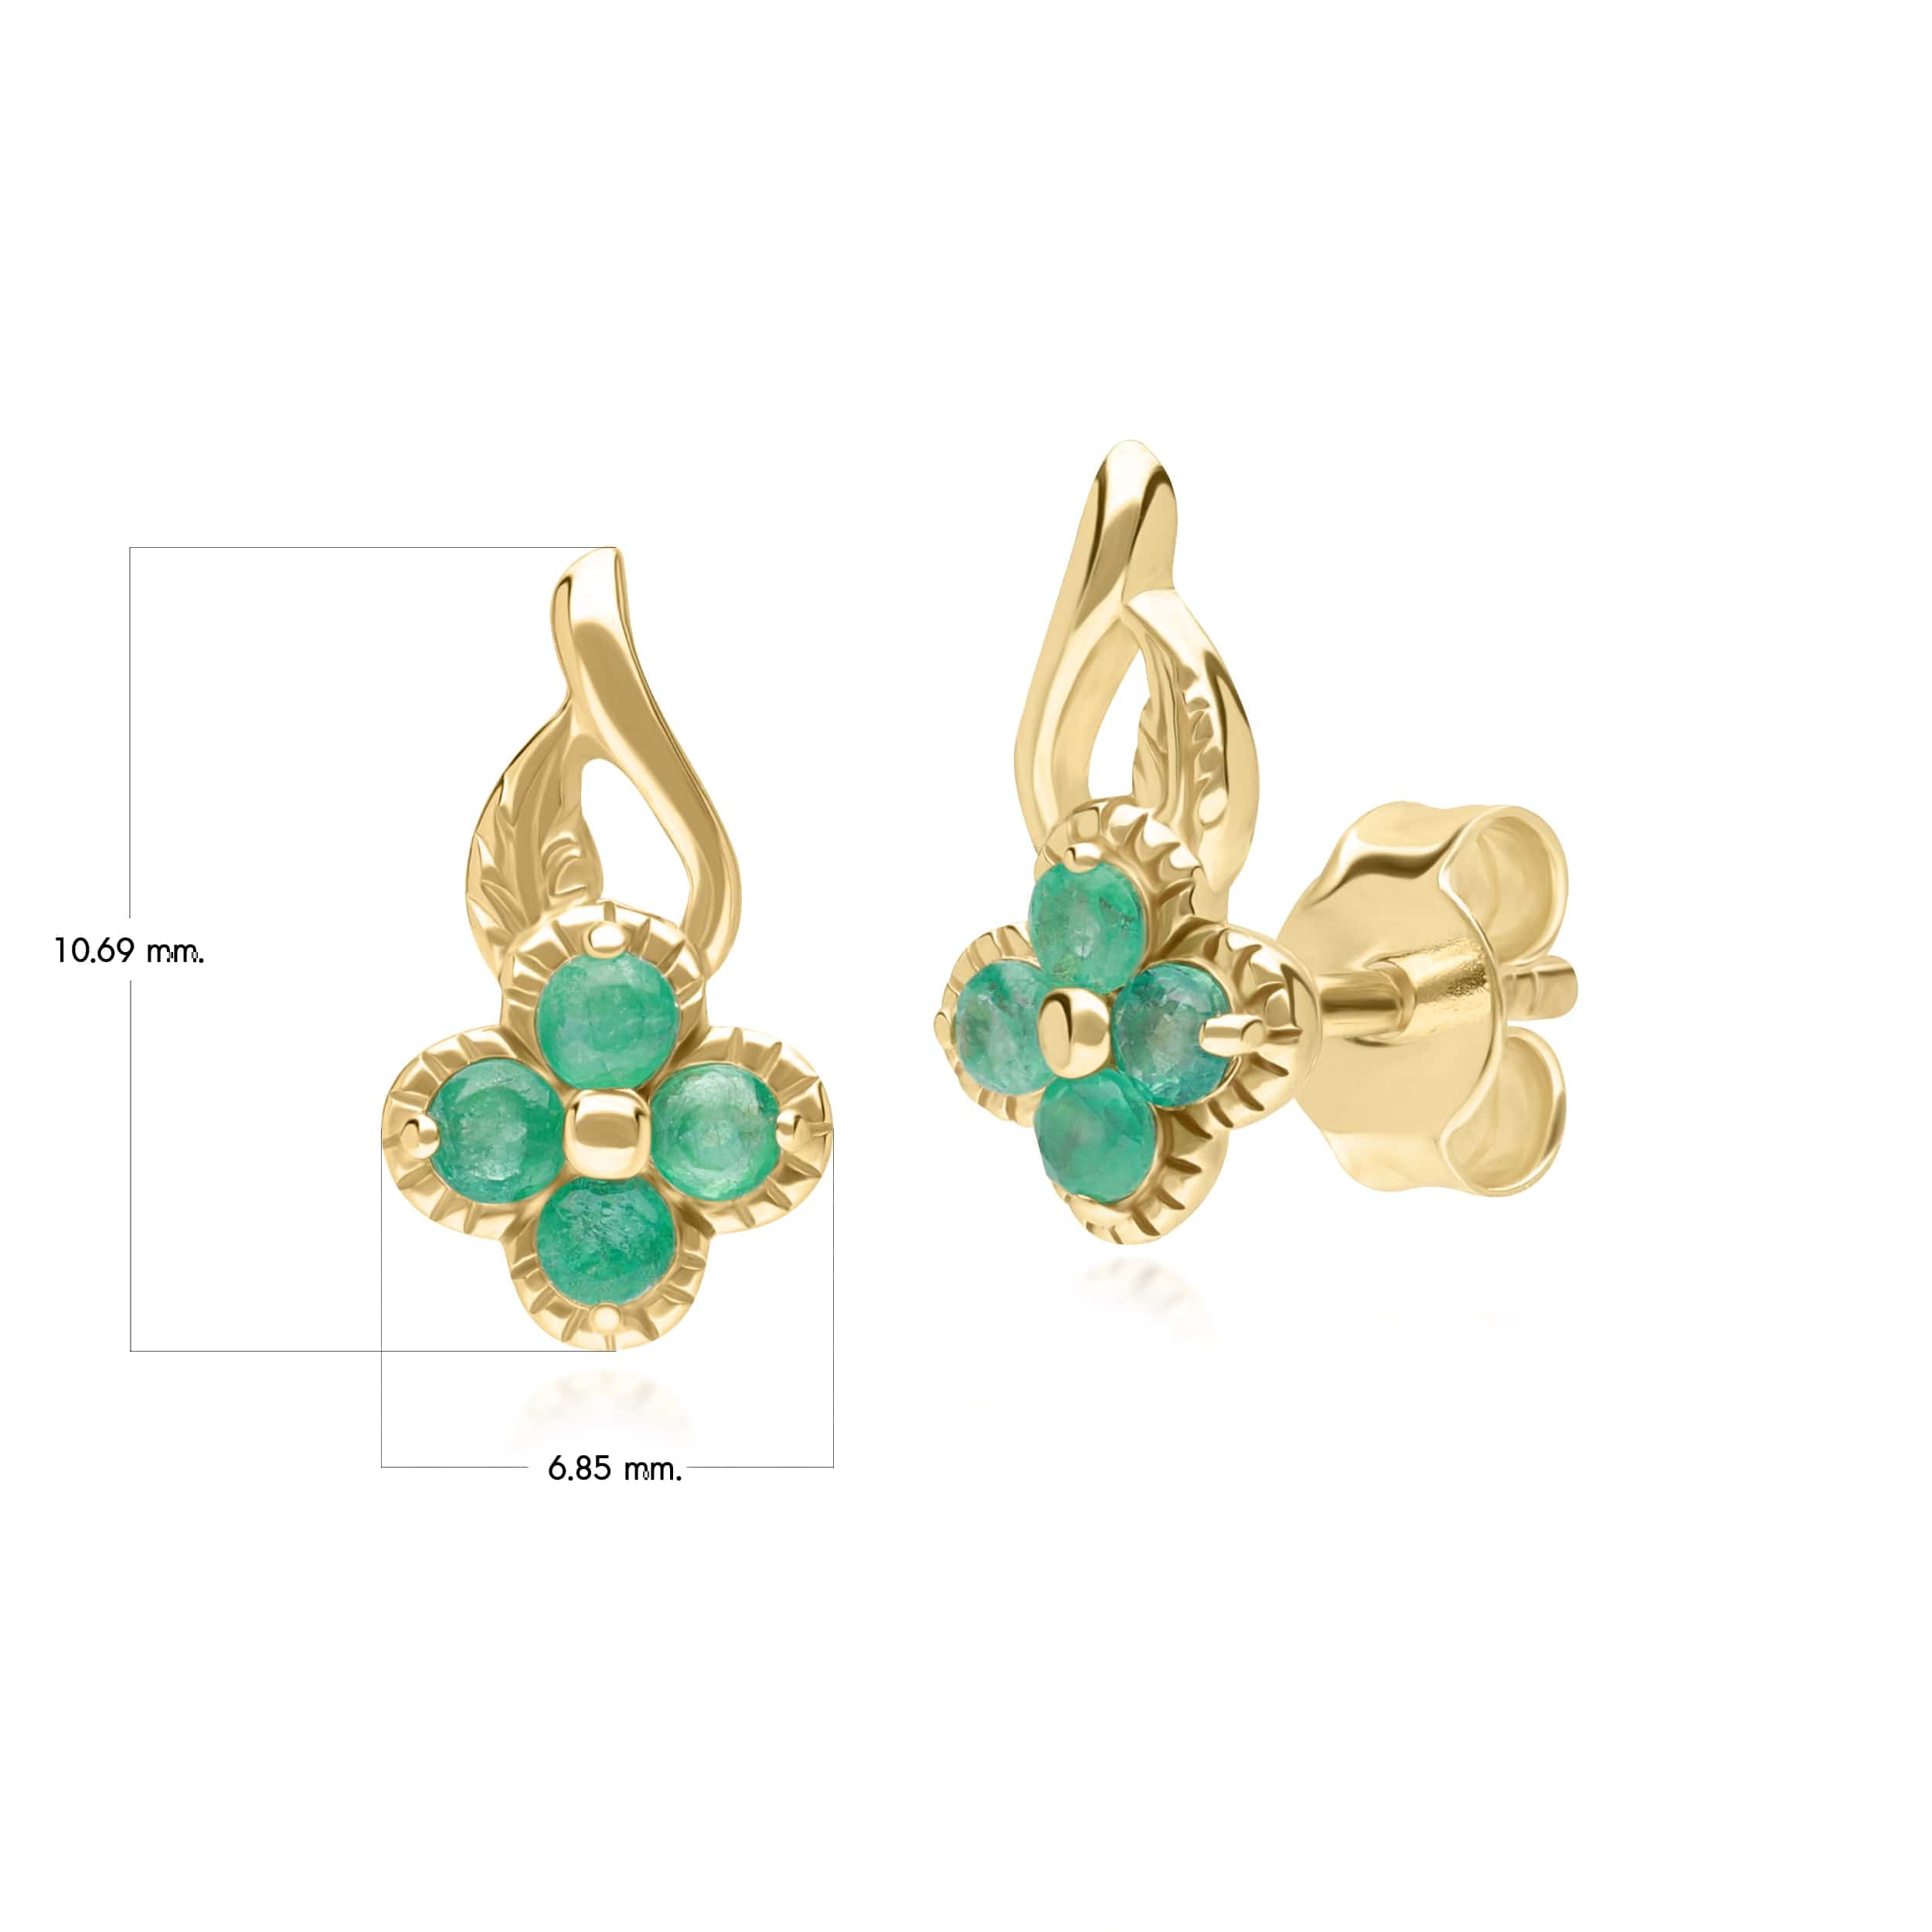 Floral Round Emerald Stud Earrings in 9ct Yellow Gold